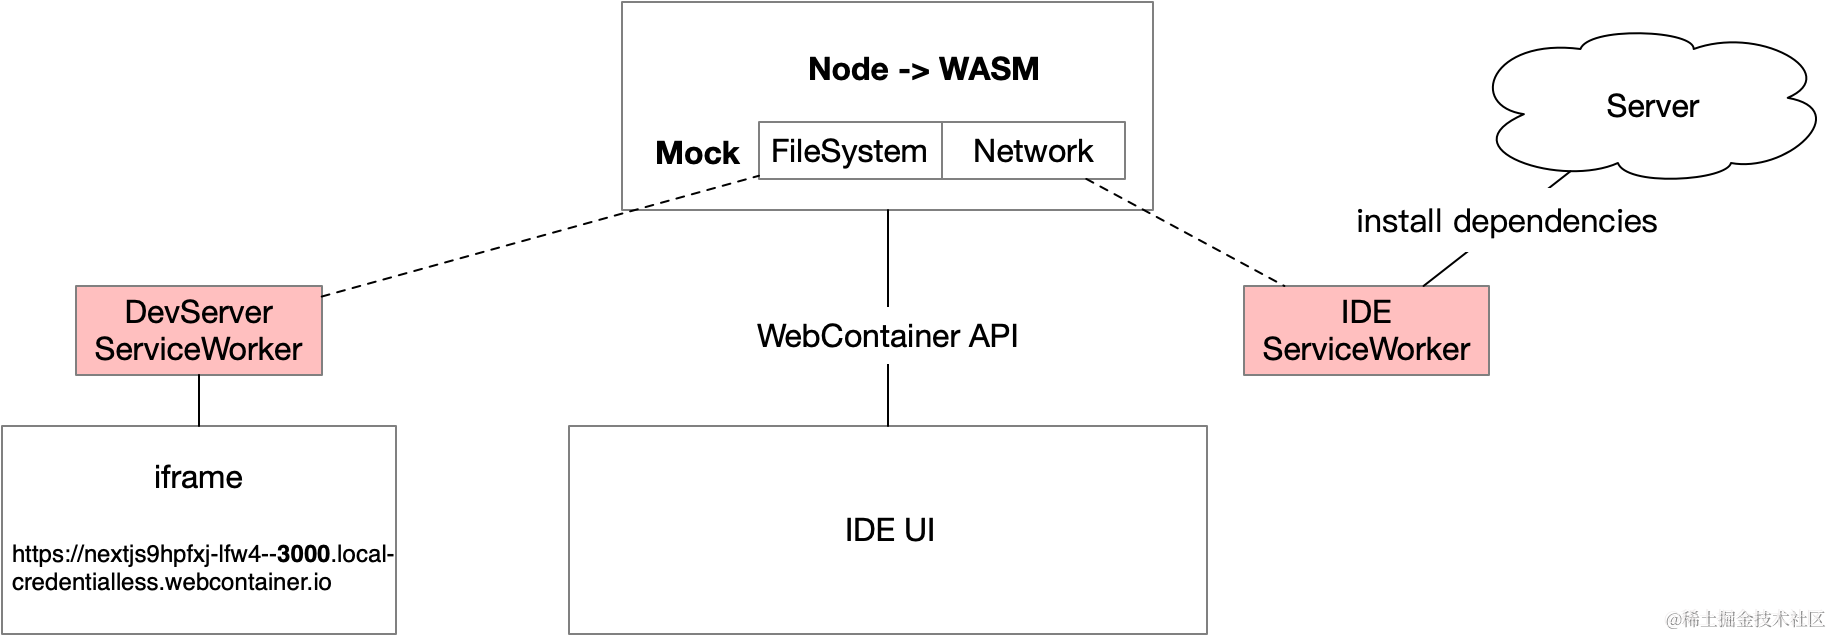 WebContainer